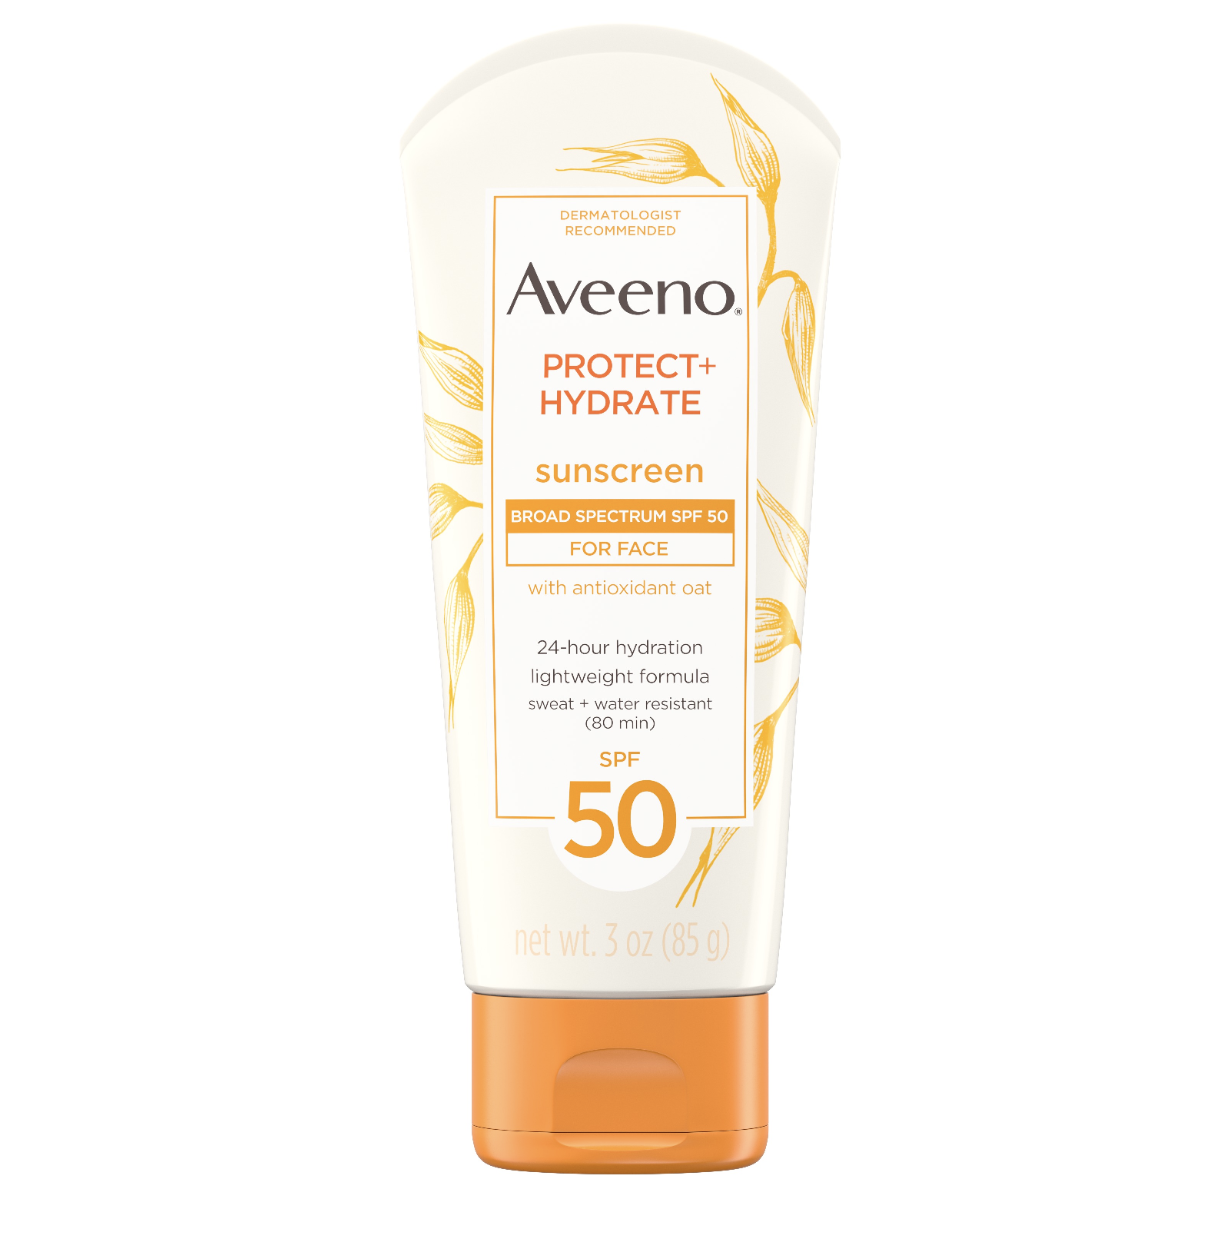 highest rated sunscreen 2016